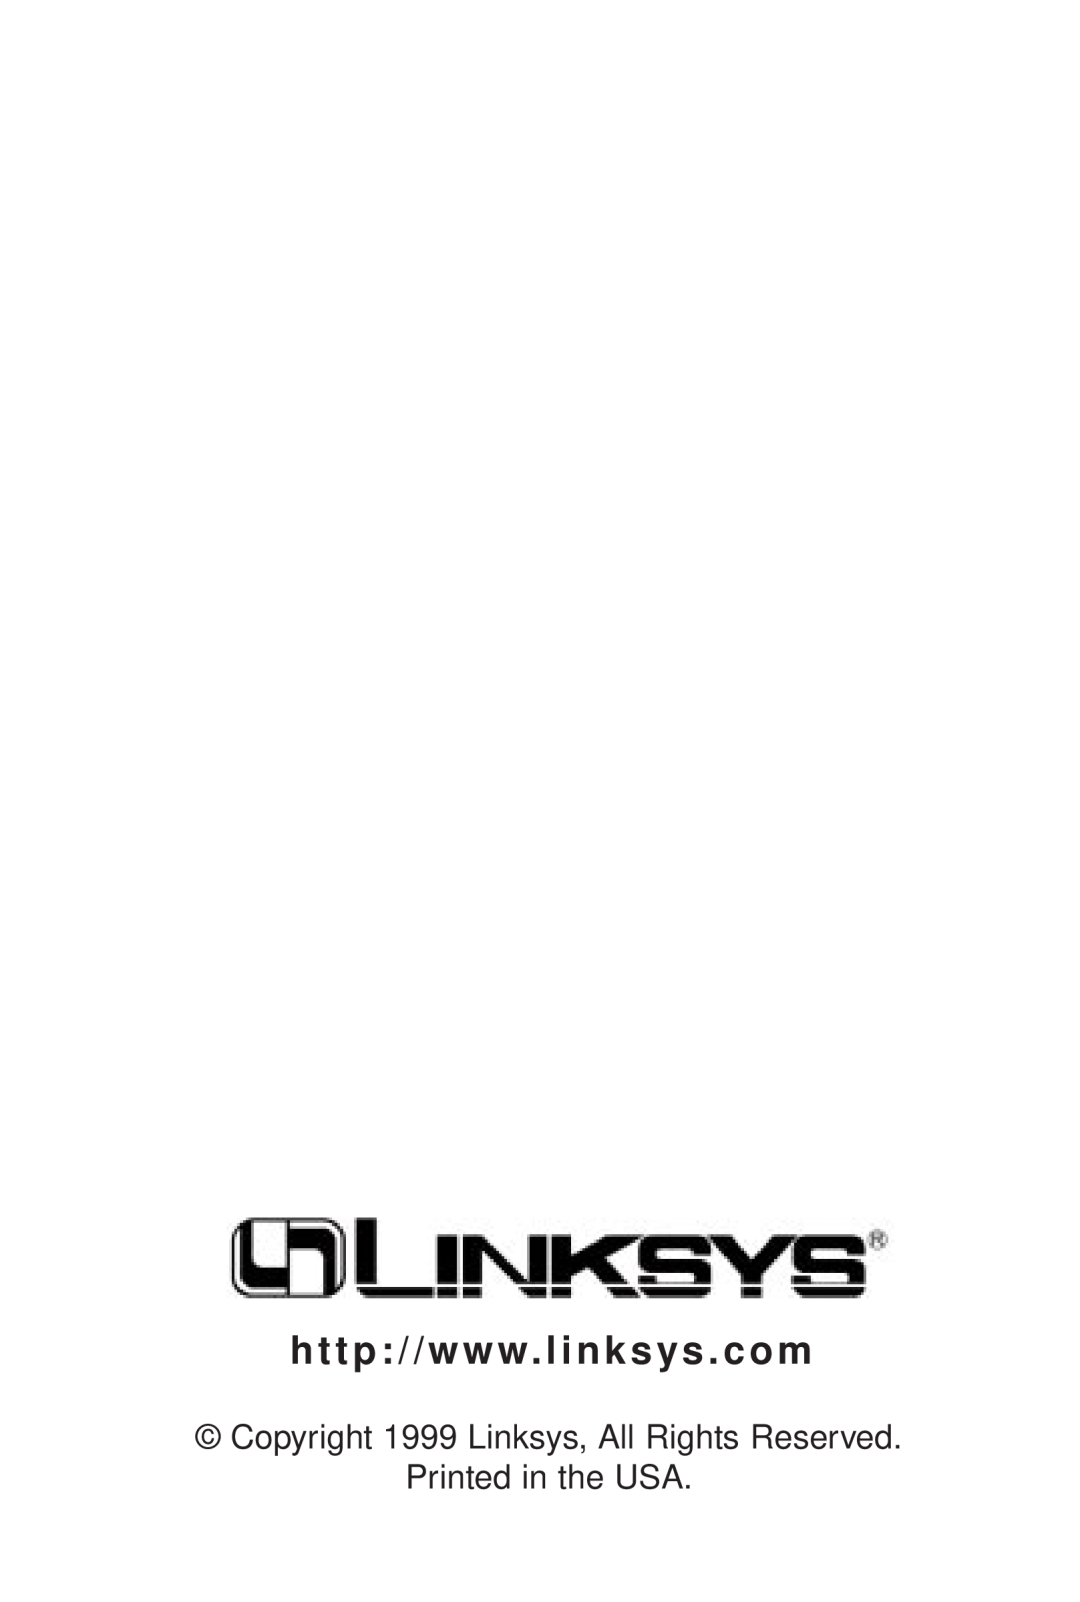 Linksys HPN100 h t t p / / w w w. l i n k s y s . c o m, Copyright 1999 Linksys, All Rights Reserved Printed in the USA 